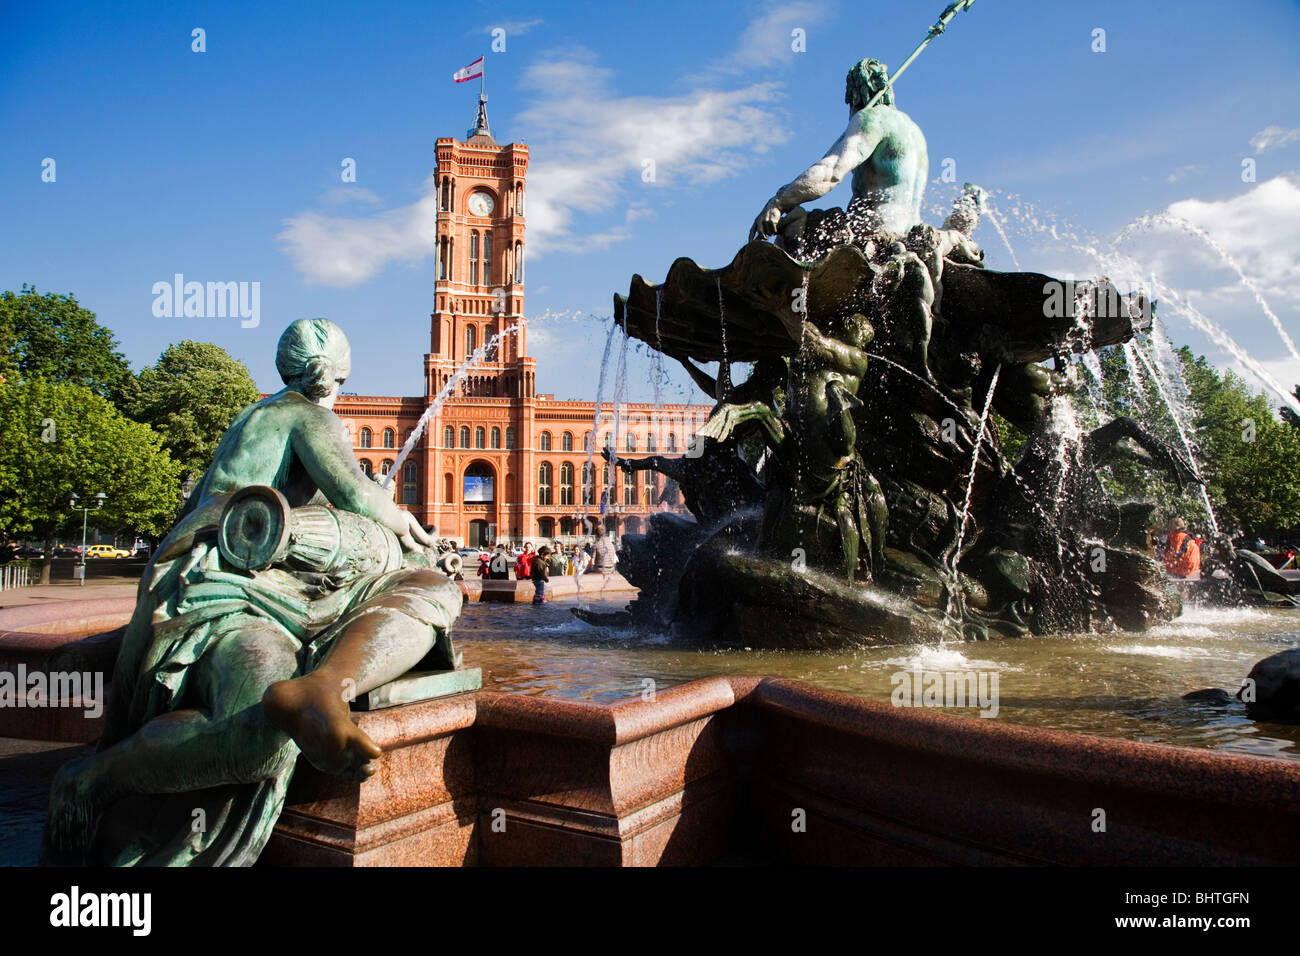 The Rotes Rathaus (Red Town Hall) with the Neptunbrunnen (Neptune fountain) in front . Berlin, Germany Stock Photo